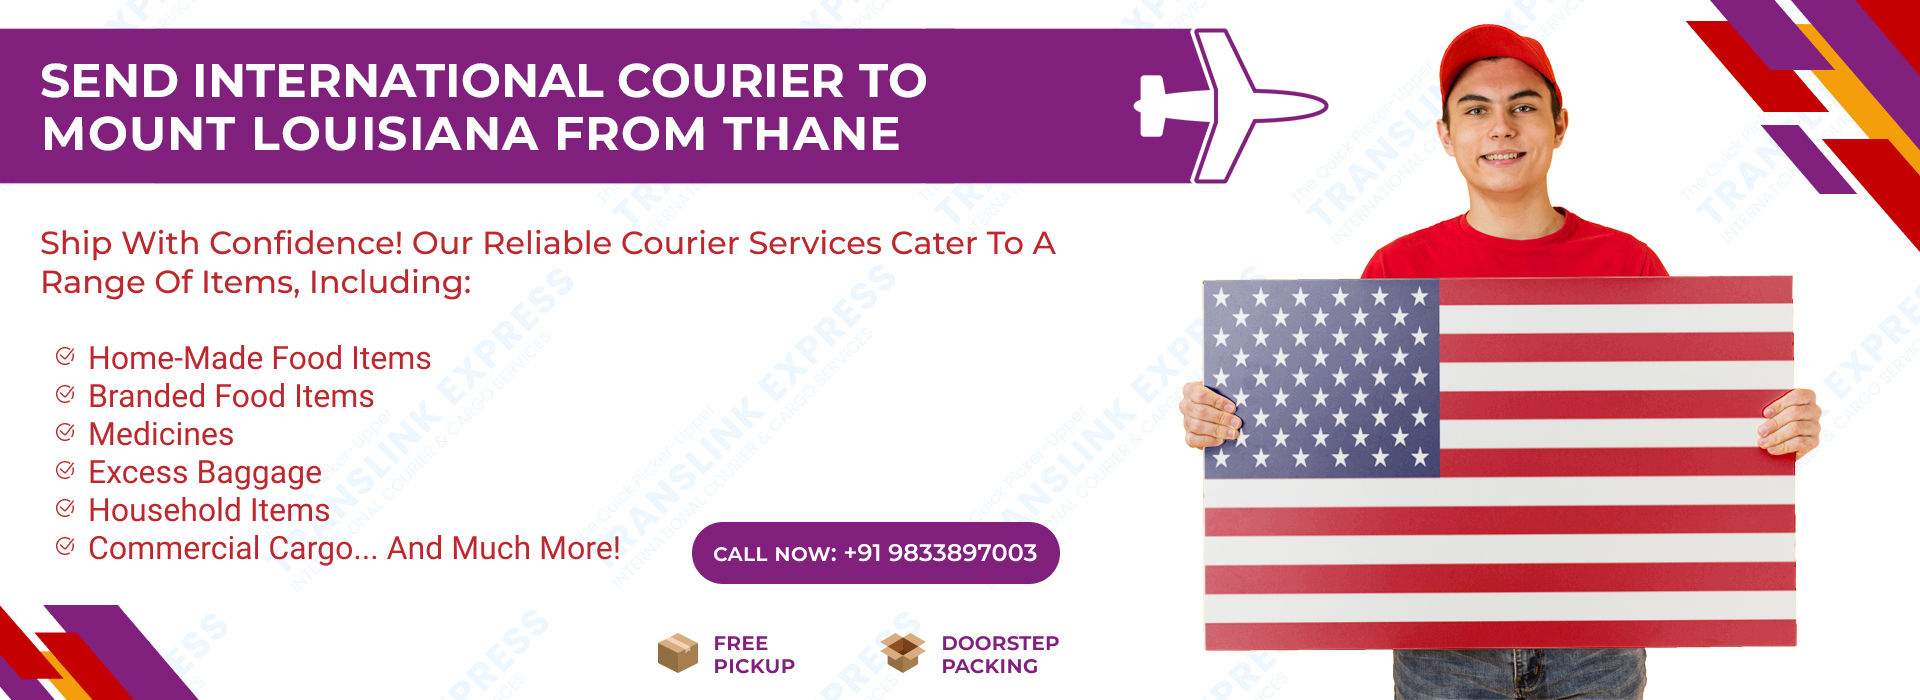 Courier to Mount Louisiana From Thane